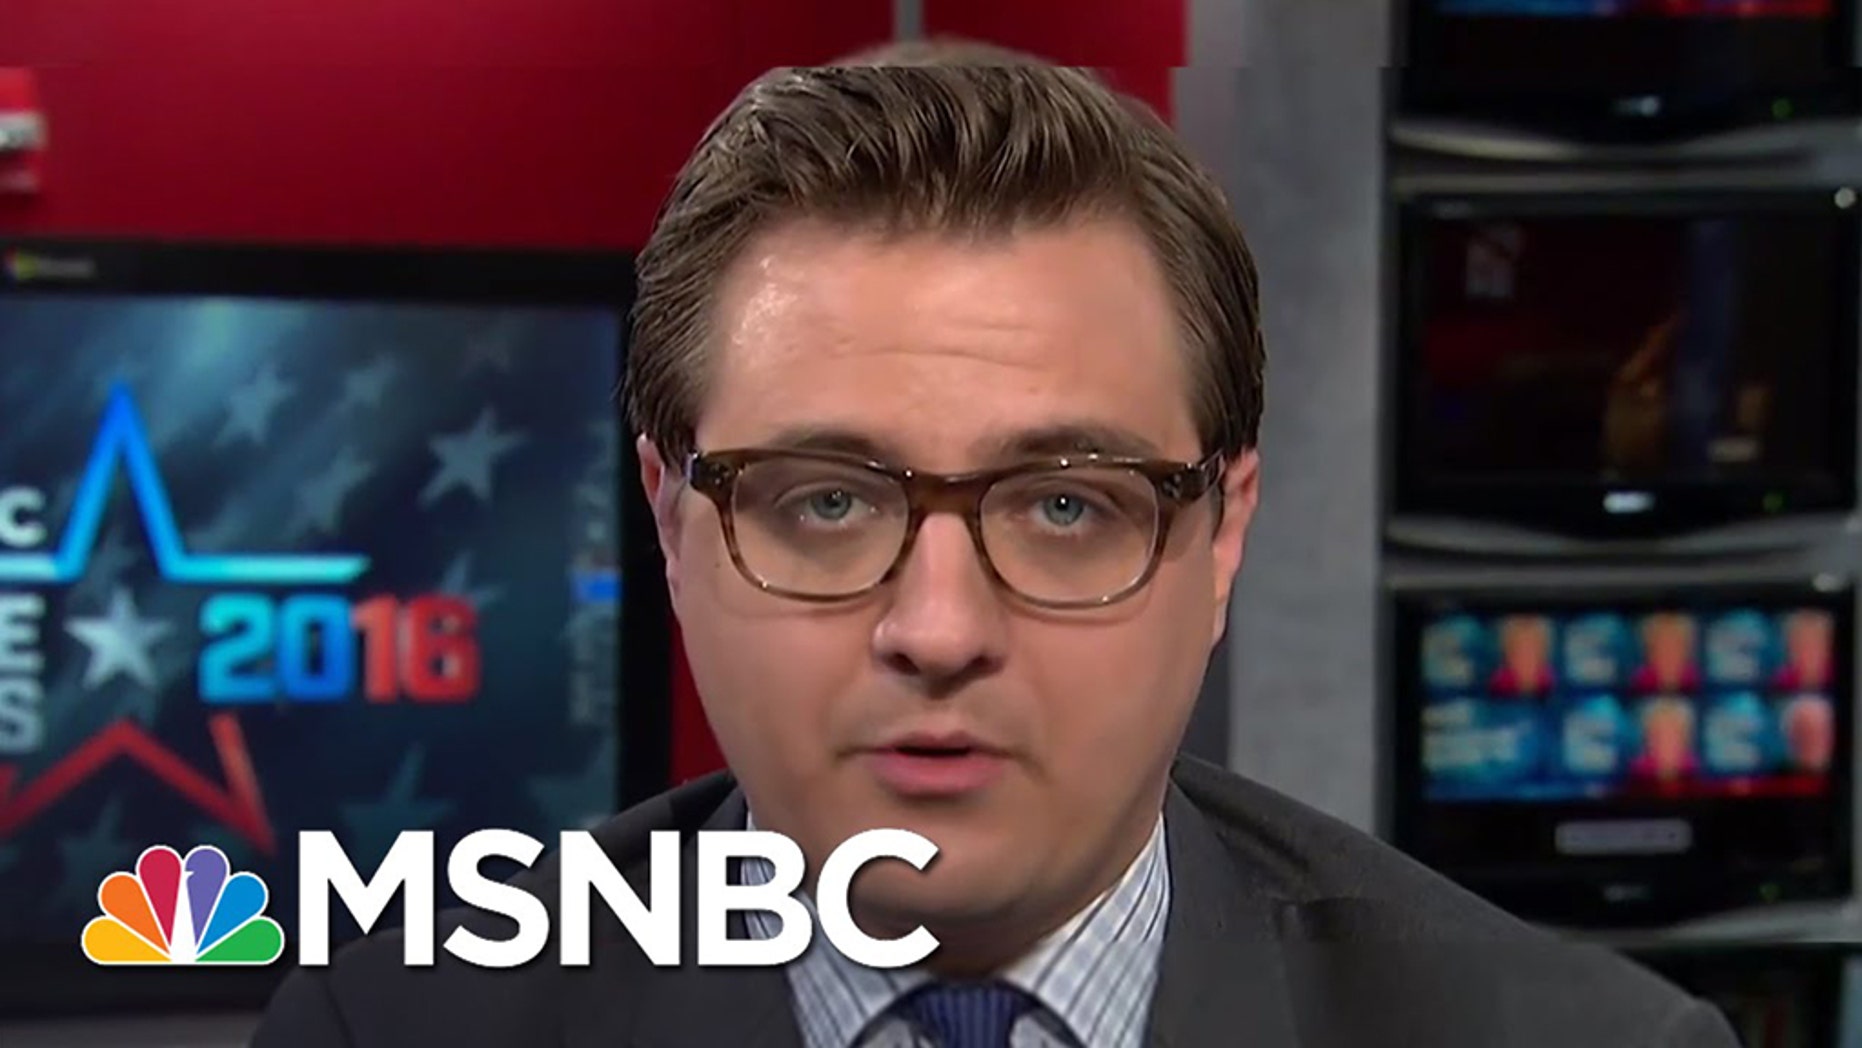 MSNBC’s Chris Hayes has ‘fear’ Trump will launch military strike to distract ...1862 x 1048